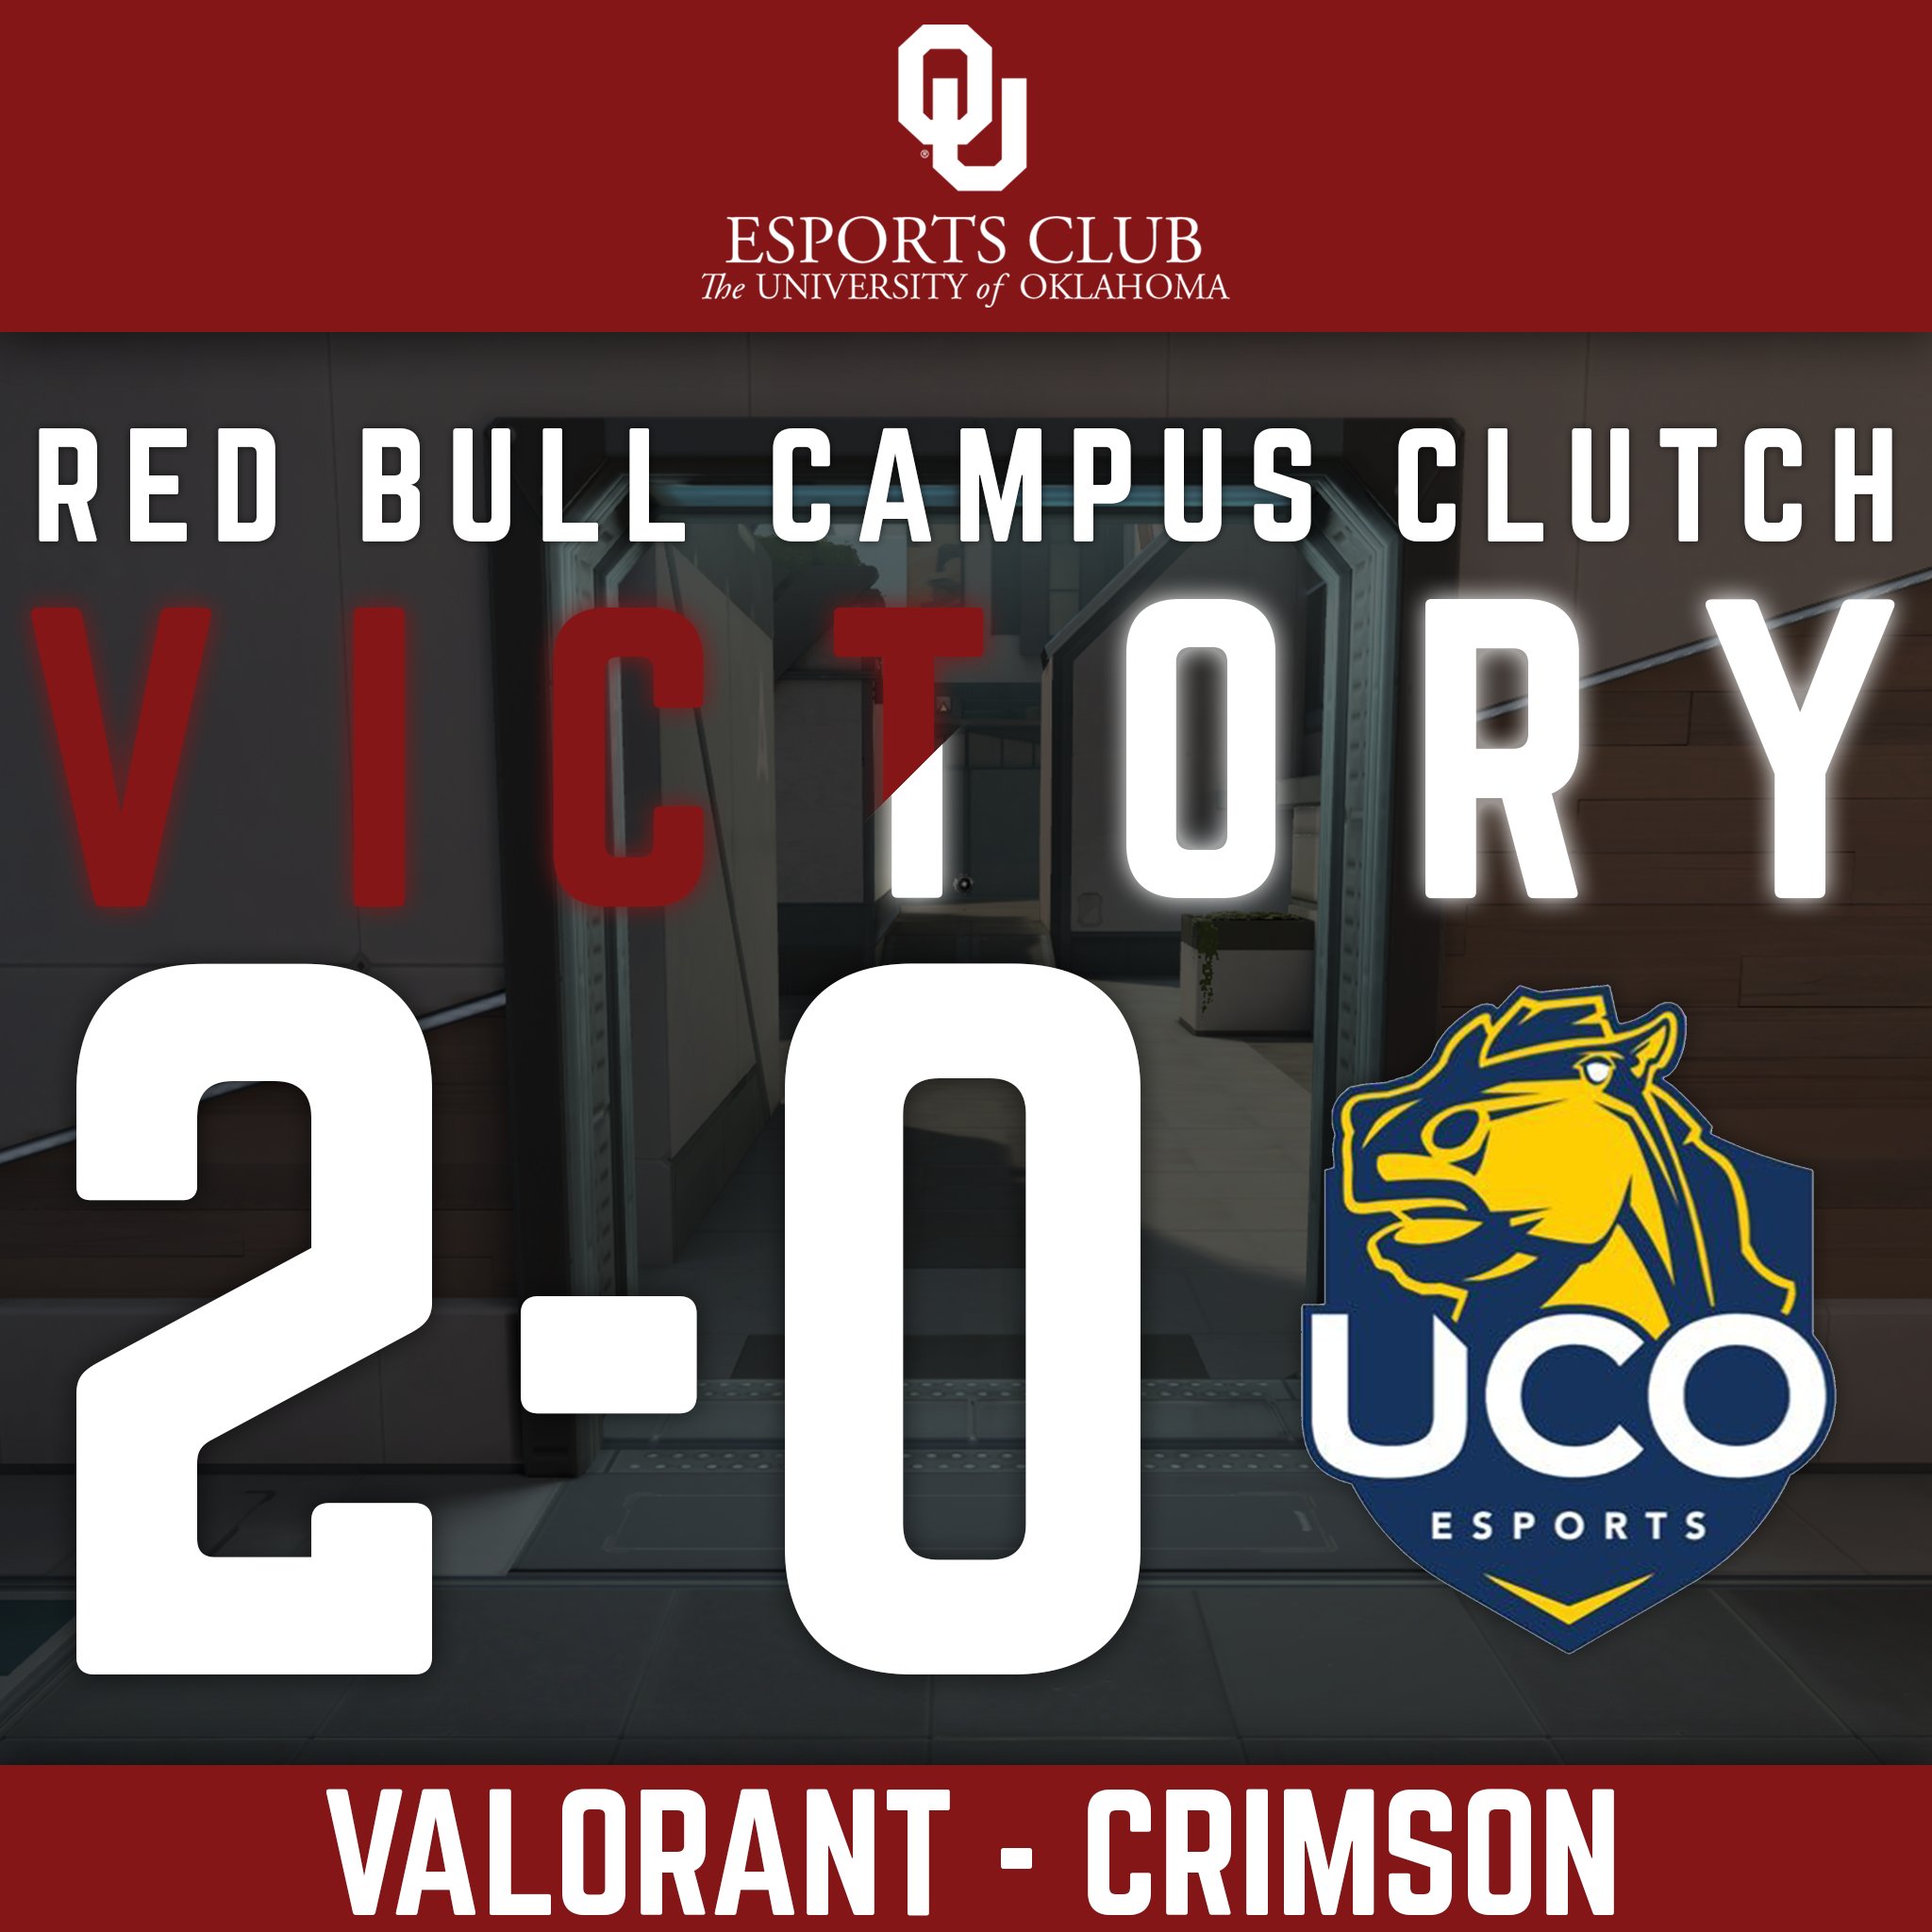 The Ou Esports Club Our Valorant Crimson Team Takes Down Ucoesports In The Red Bull Campus Clutch Tournament 2 0 Ggs Boomersooner Ouesports T Co Yw2szmb1nl